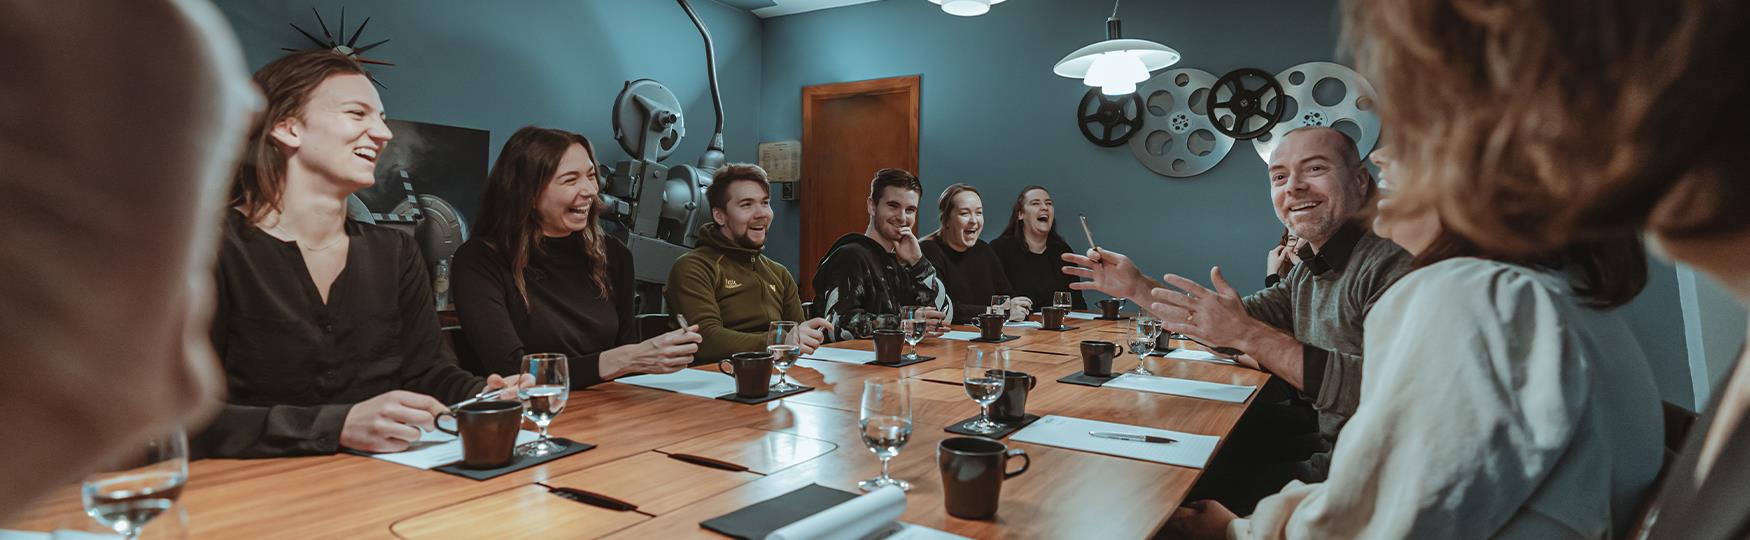 A group of persons sitting around a table in a meeting room